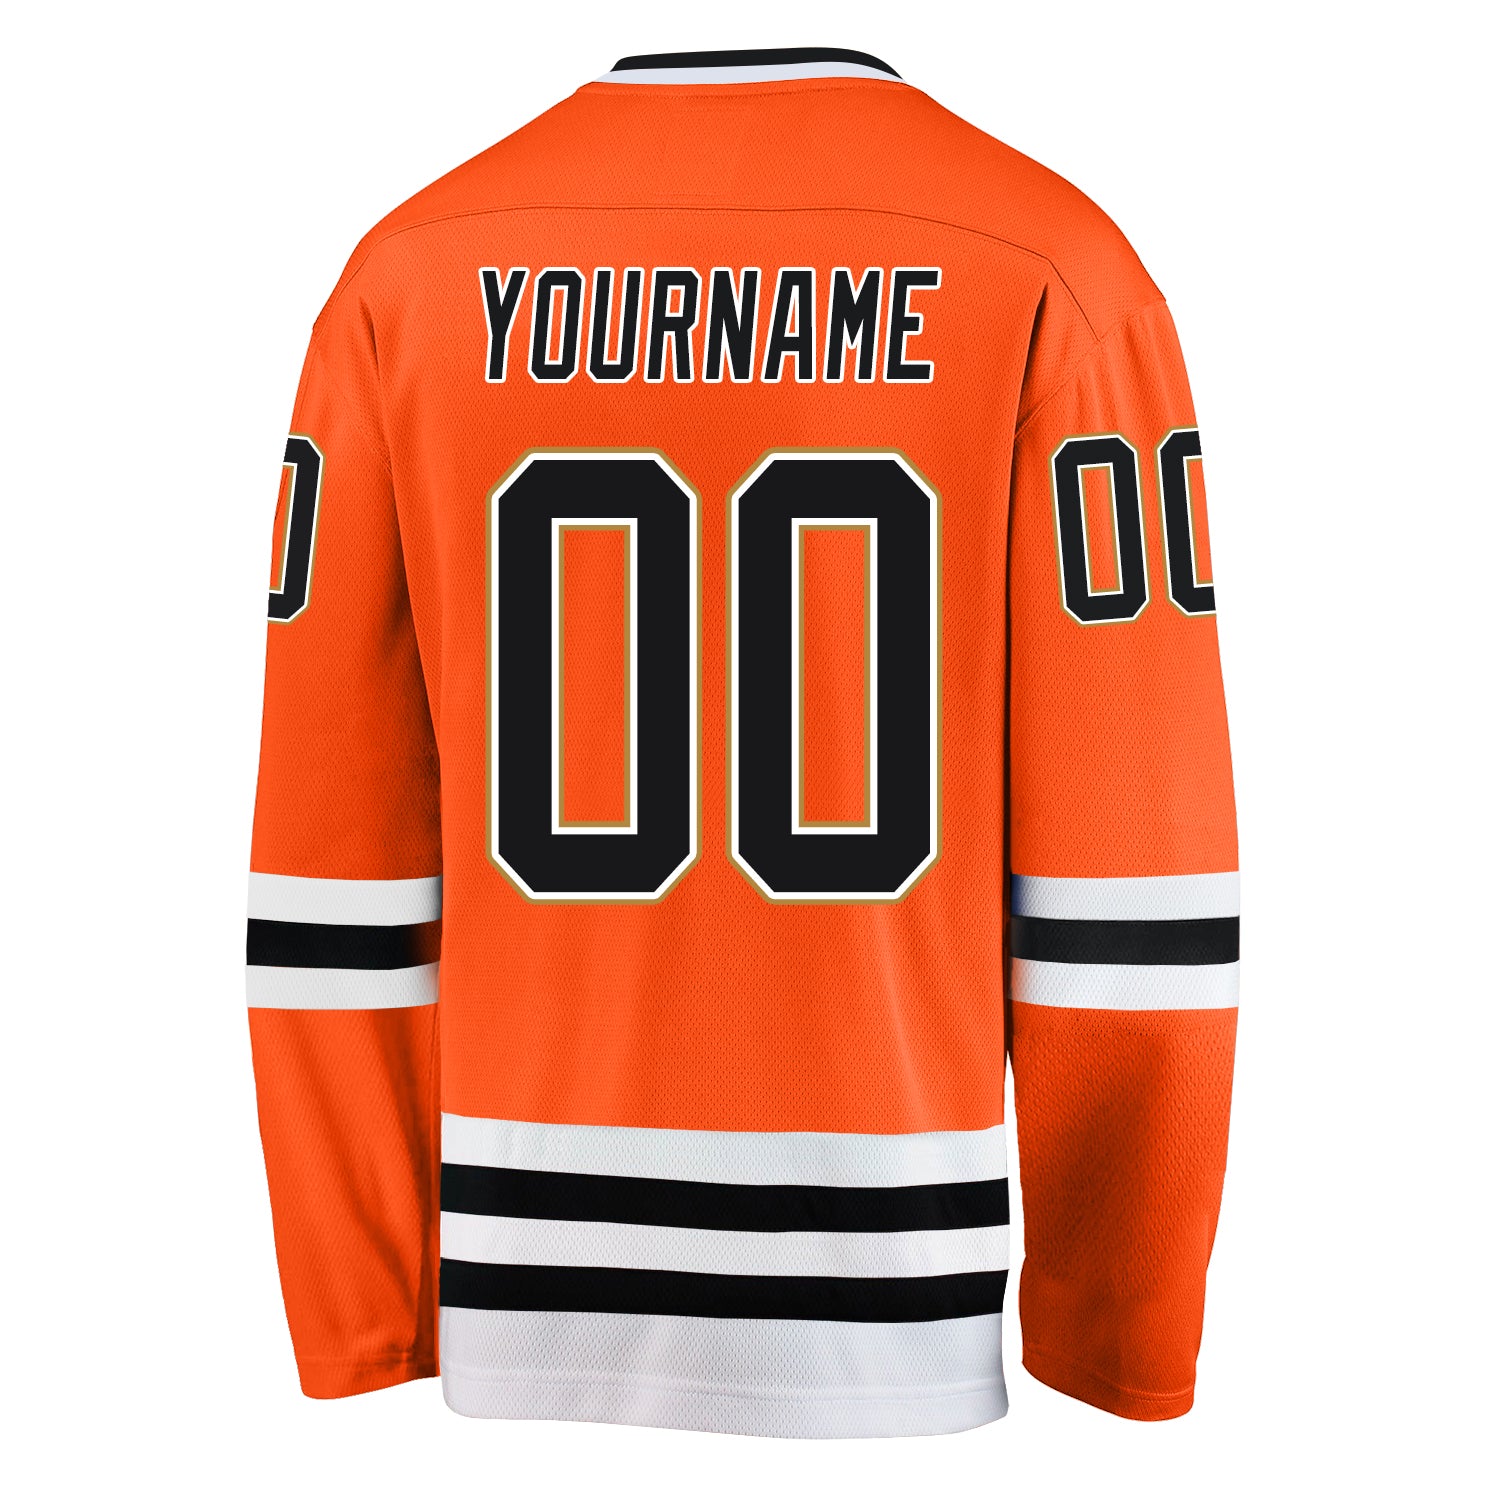  Pullonsy Orange Custom Ice Hockey Jersey for Men Women Youth  S-8XL Stadium Series Authentic Stitched Name & Numbers,Black : Sports 